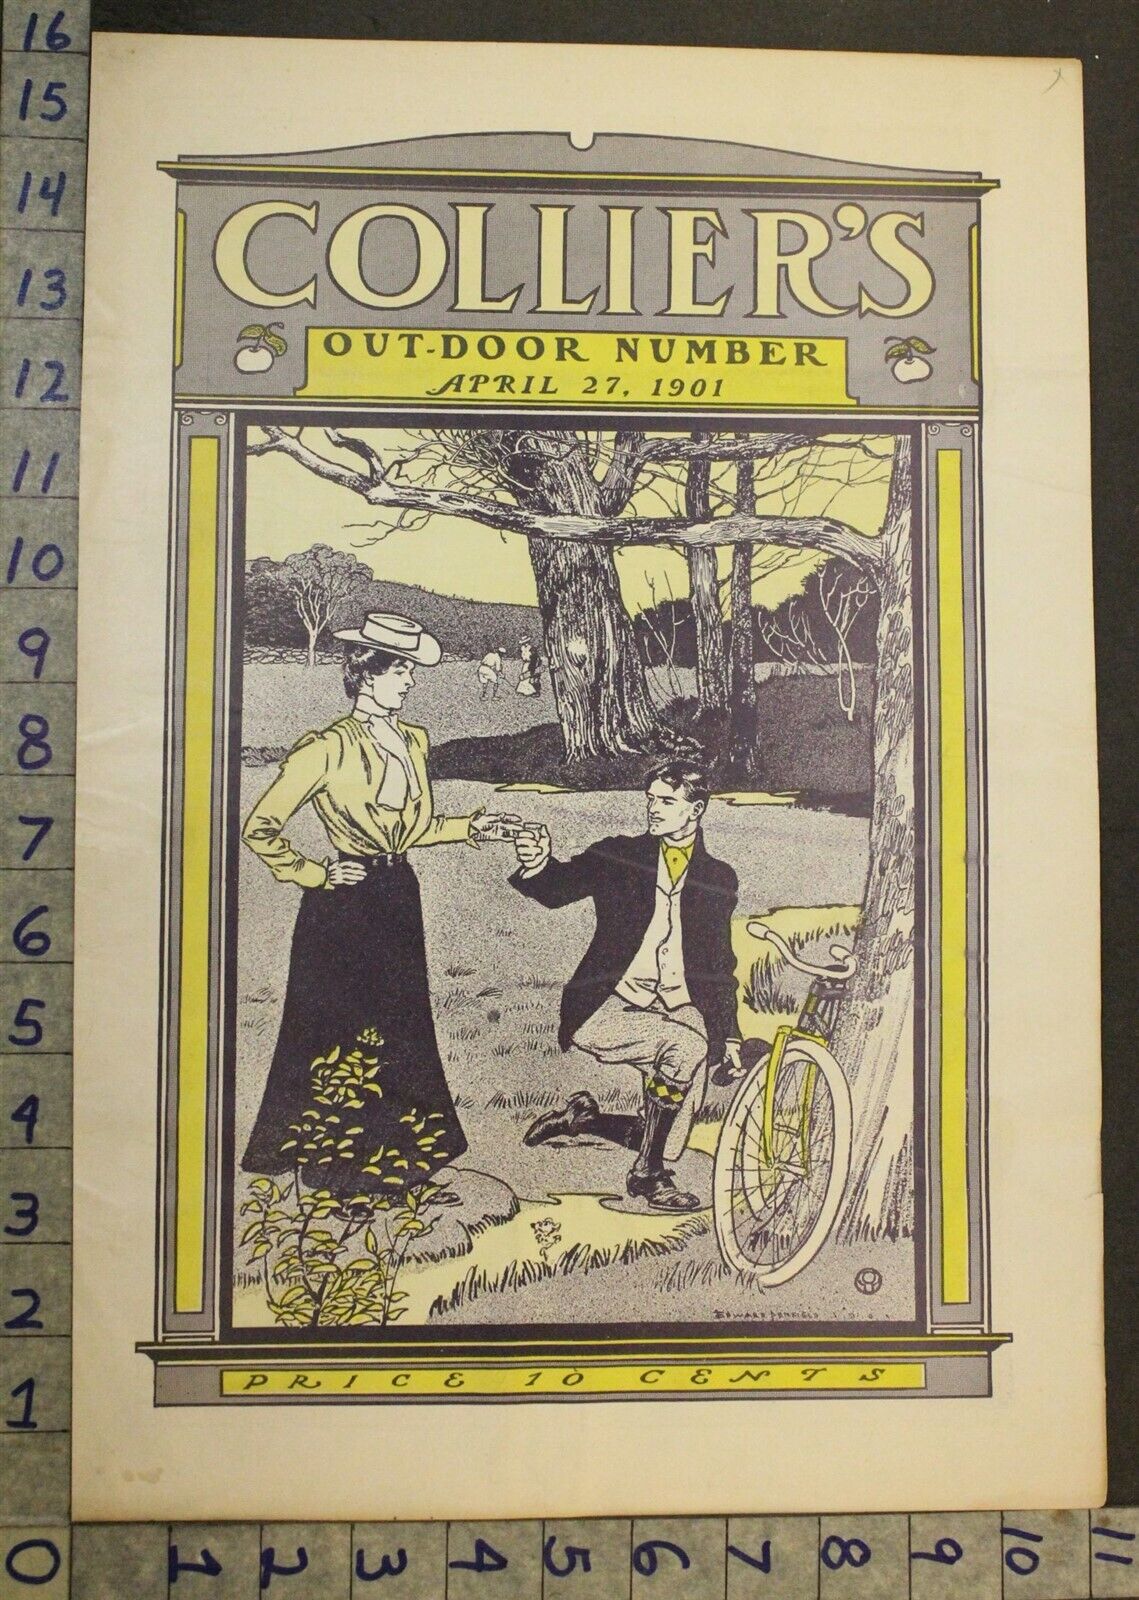 1901 BICYCLE SPORT LOVE OUTDOOR COLLIERS COVER EDWARDIAN ART 27619